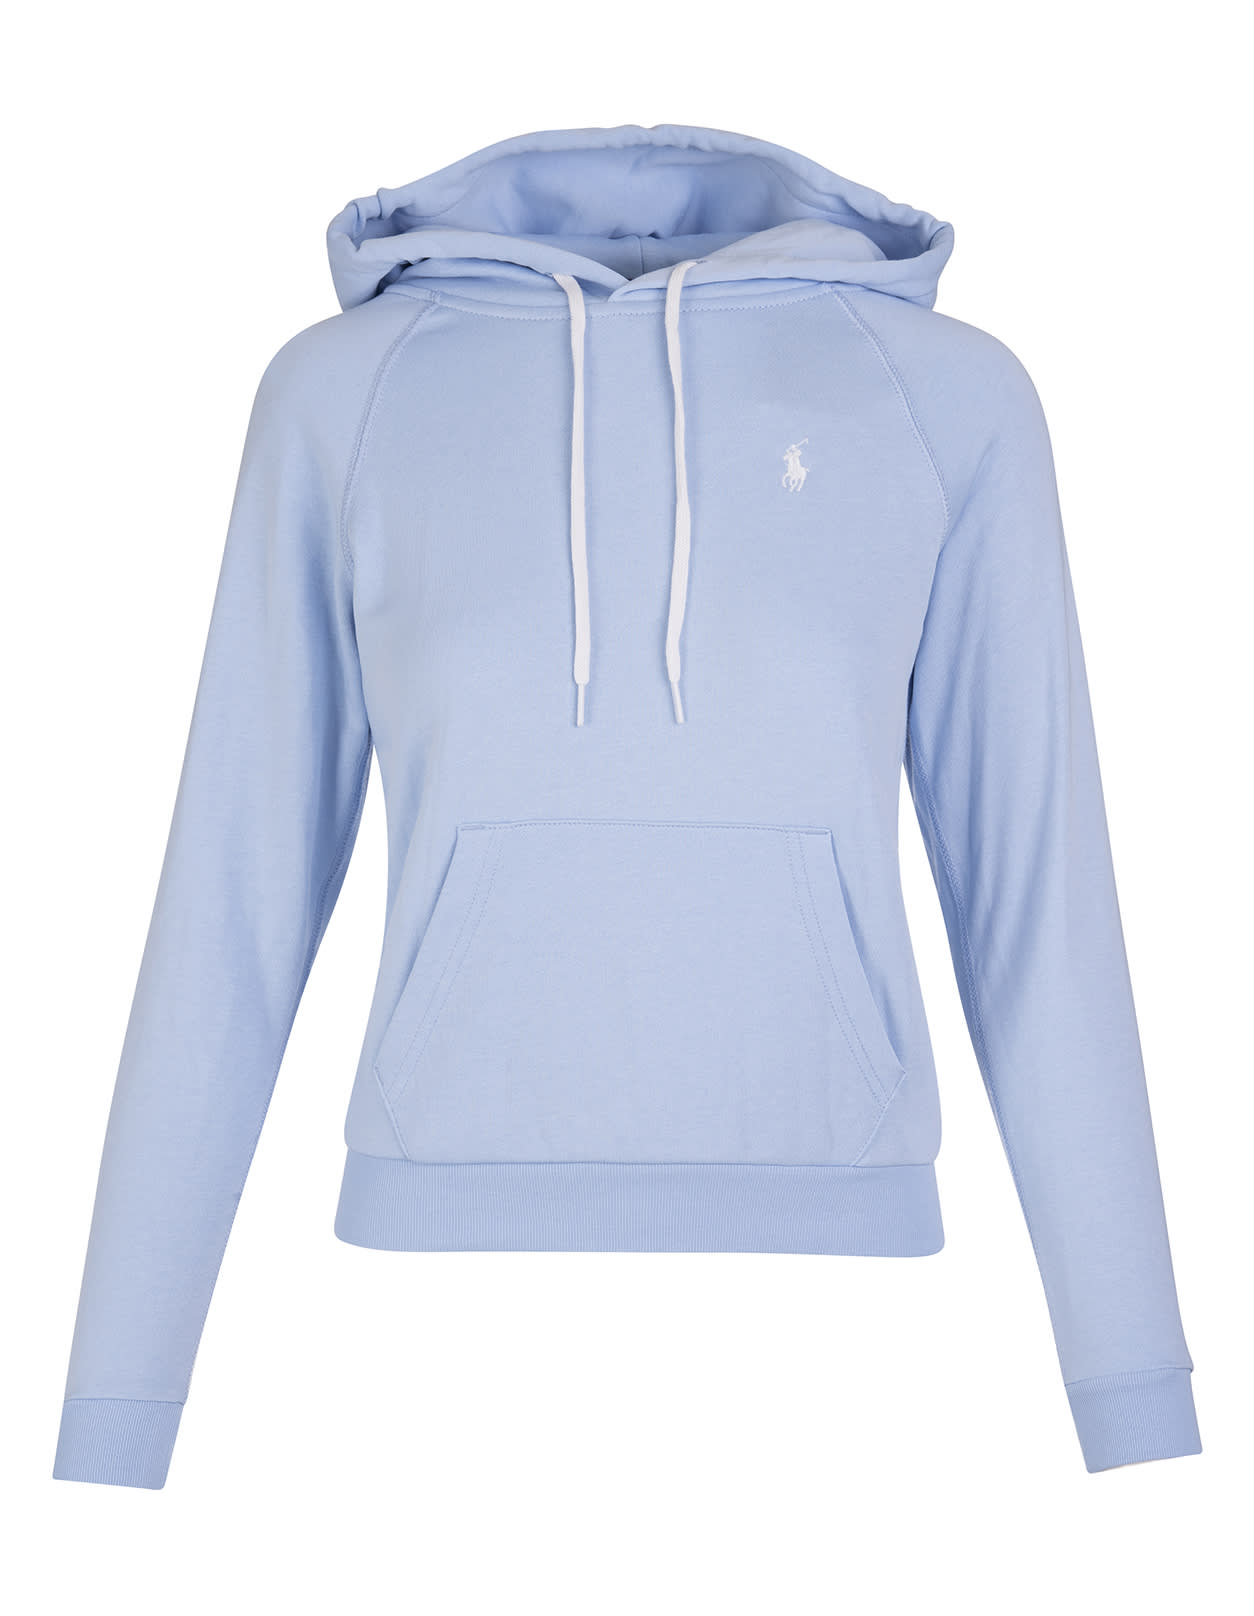 Ralph Lauren Woman Hoodie In Light Blue Cotton With White Pony